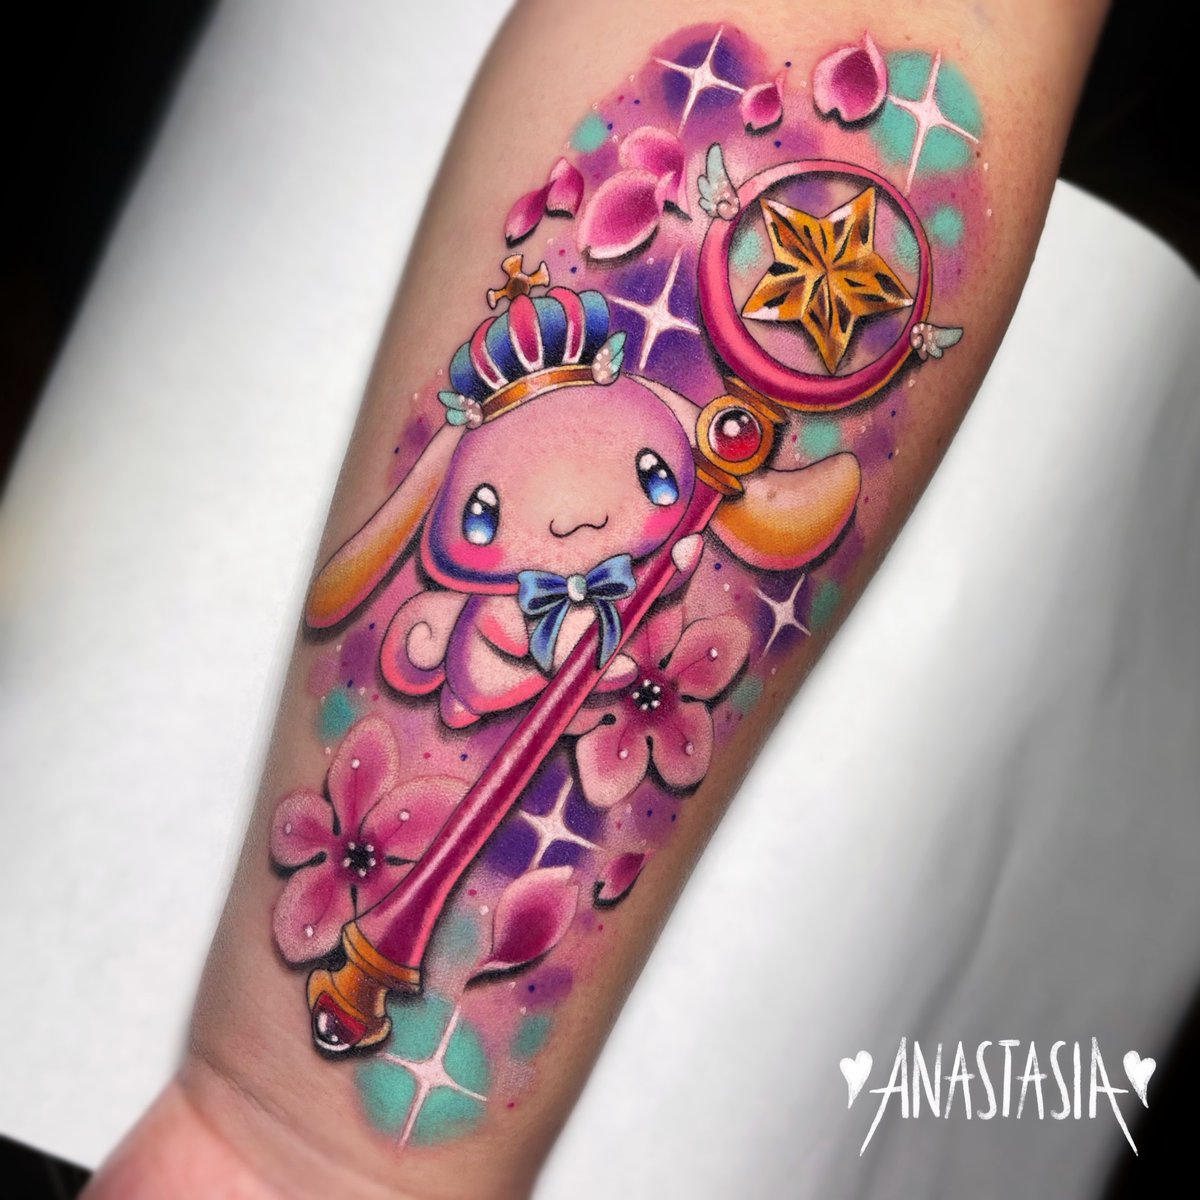 🌸CINNAMOROLL ROYALNESS🌸
One of my favorite things to tattoo are Sanrio characters 🥰
Which one is your favorite? :3

#sanrio #tattoo #kawaii #kawaiitattoo